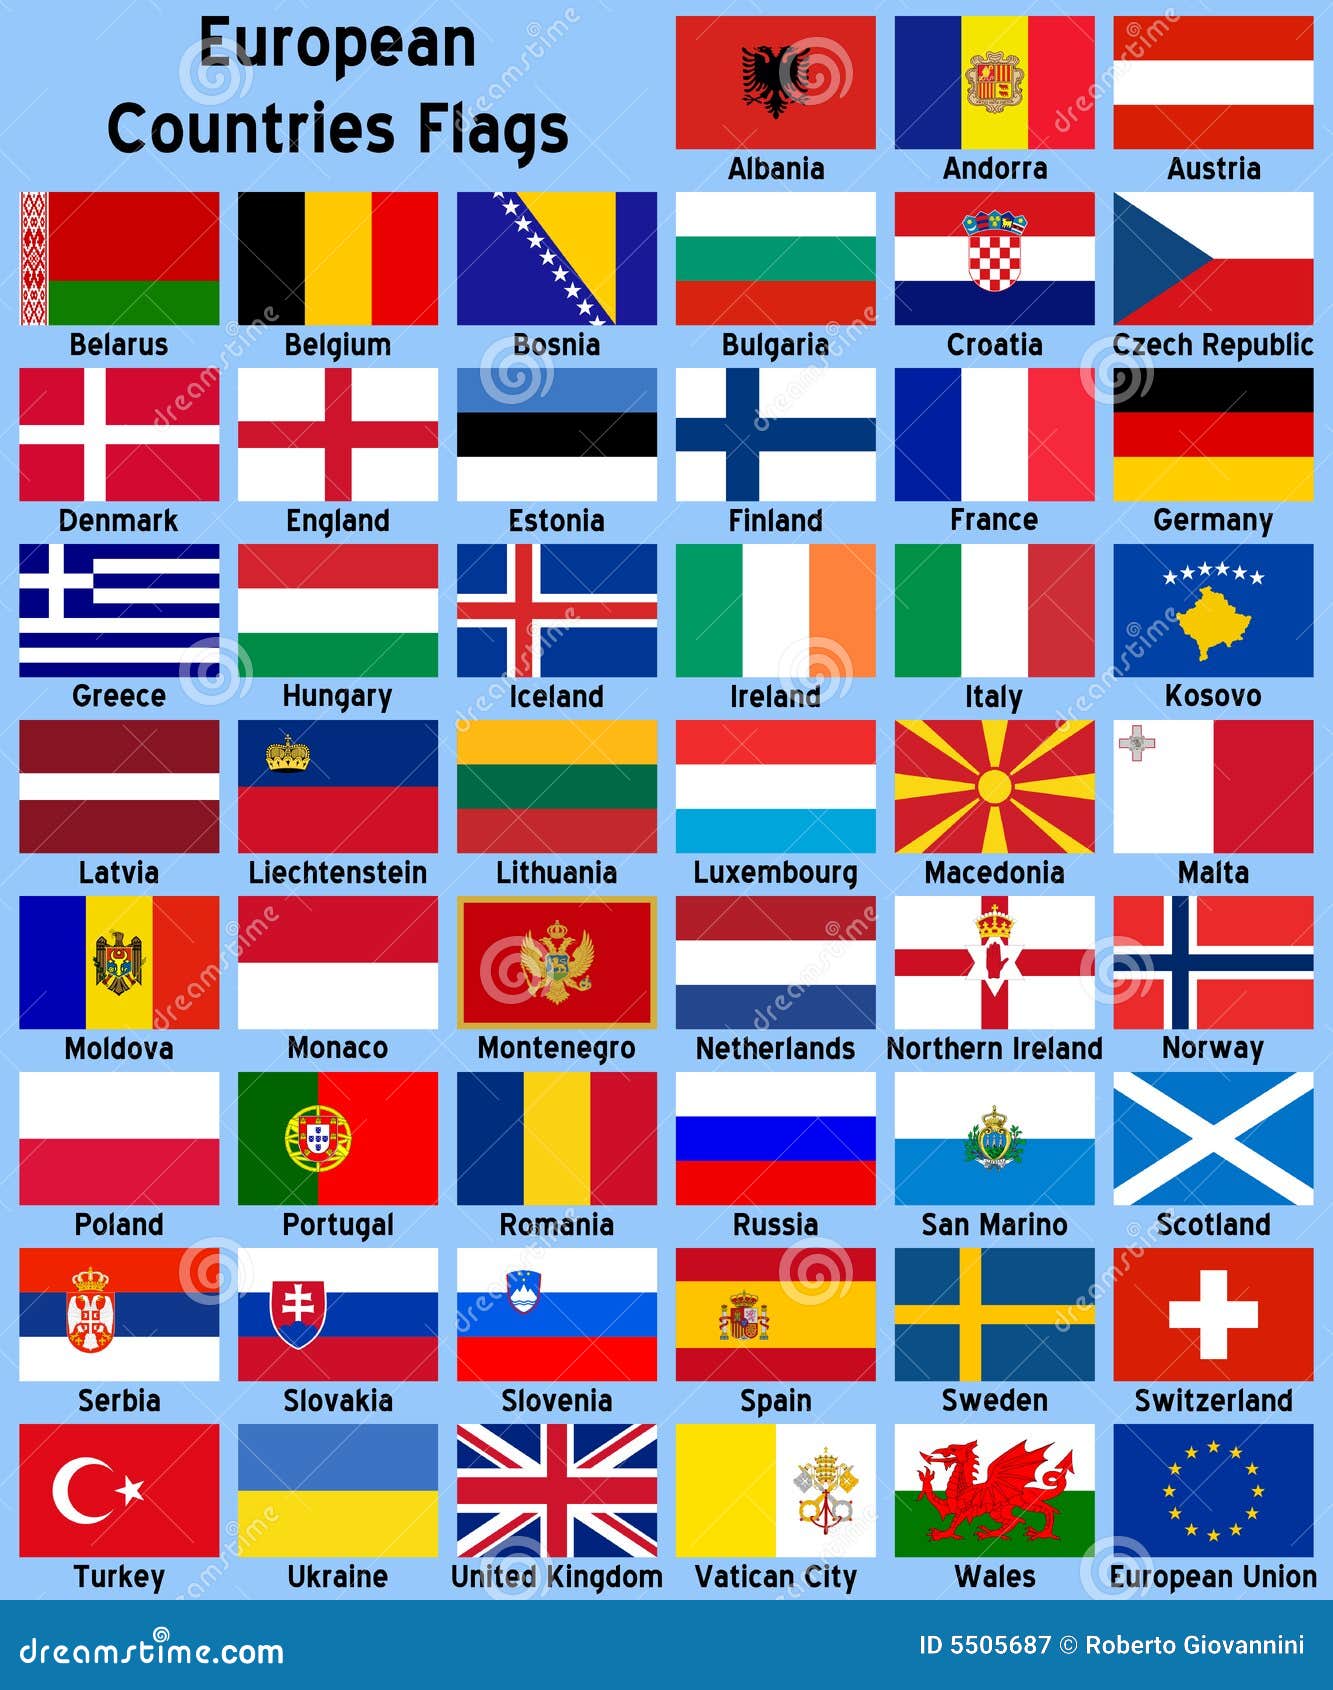 European Countries Flags Royalty Free Stock Photography - Image: 5505687